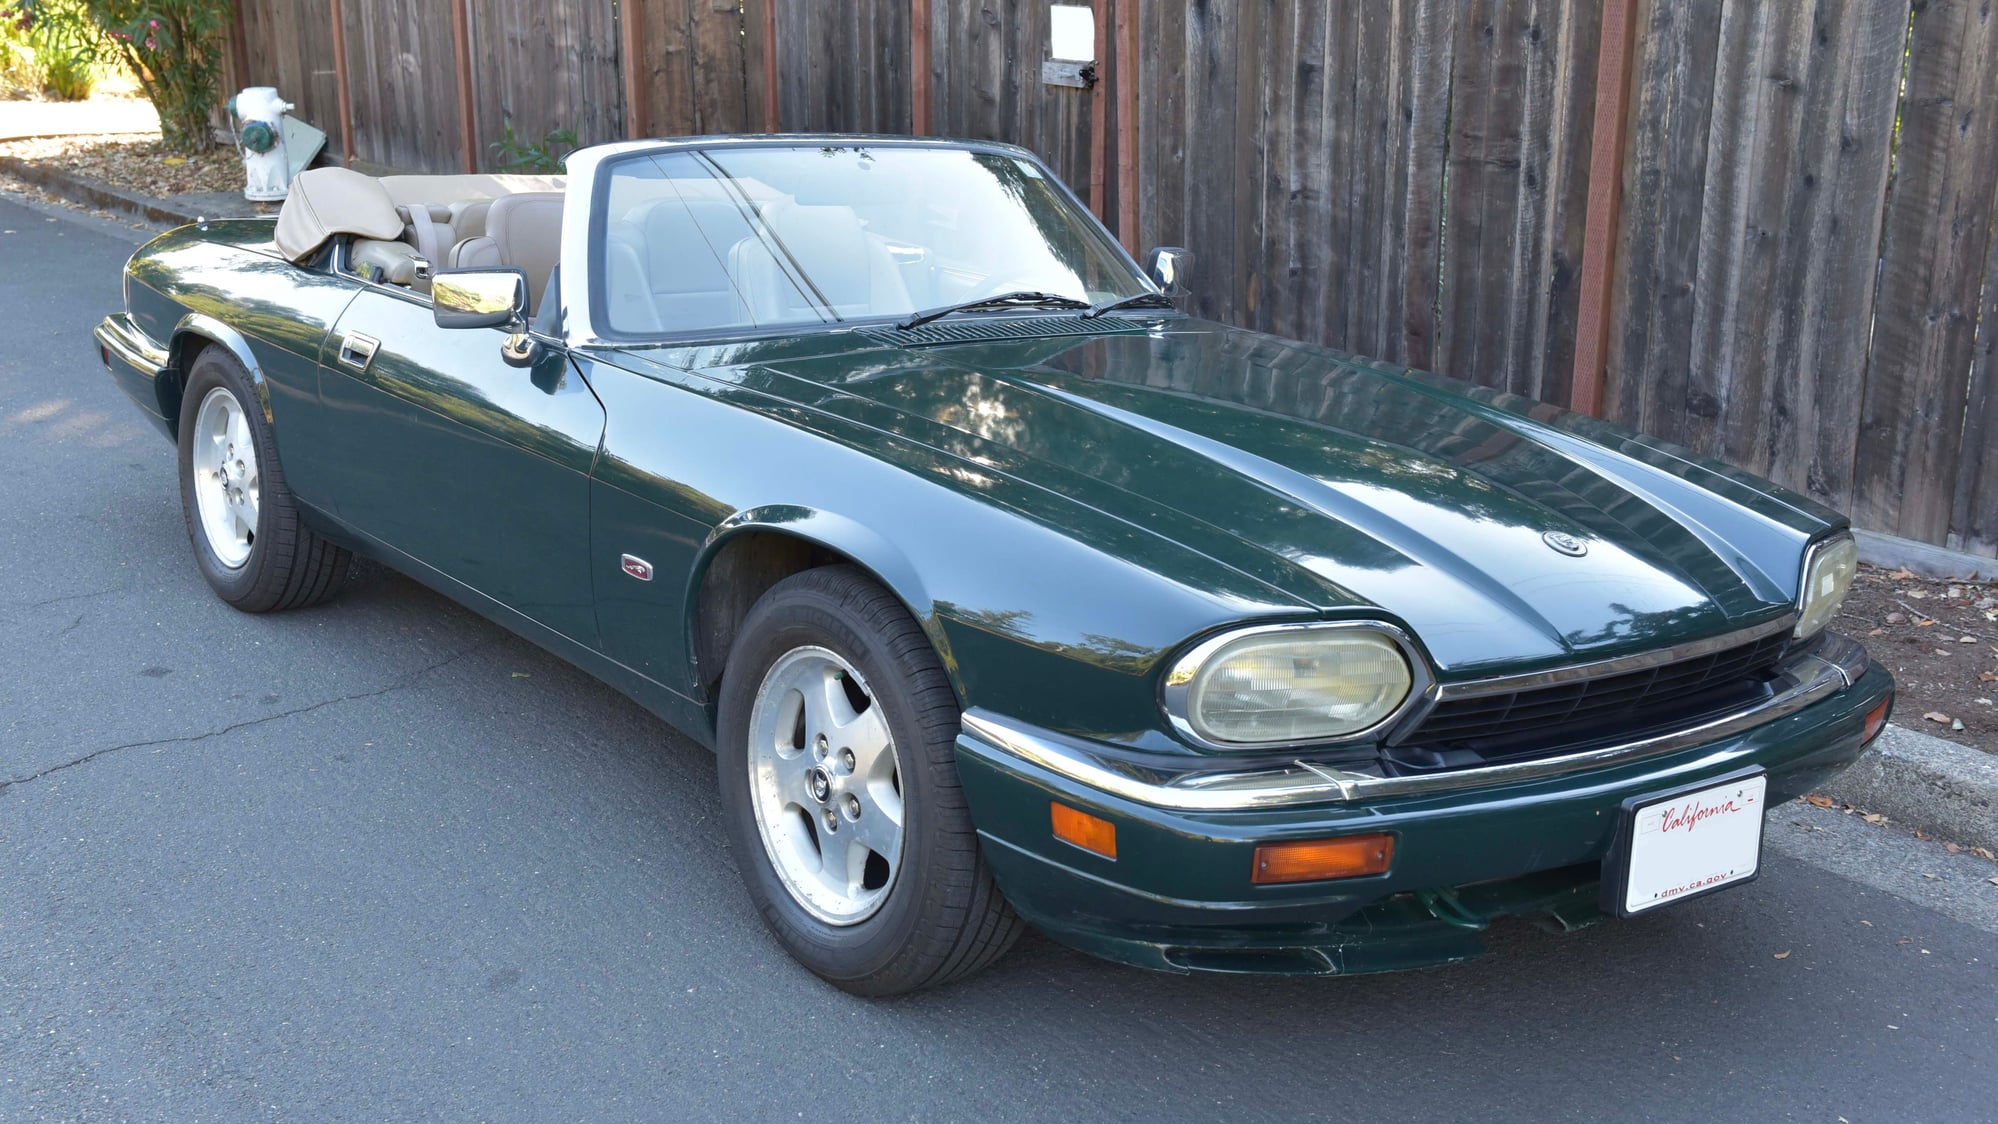 1995 Jaguar XJS - 1995 BRG XJS Convertible in CA - Used - VIN SAJNX2741SC197298 - 195,224 Miles - 6 cyl - 2WD - Automatic - Convertible - Other - Santa Rosa, CA 95404, United States